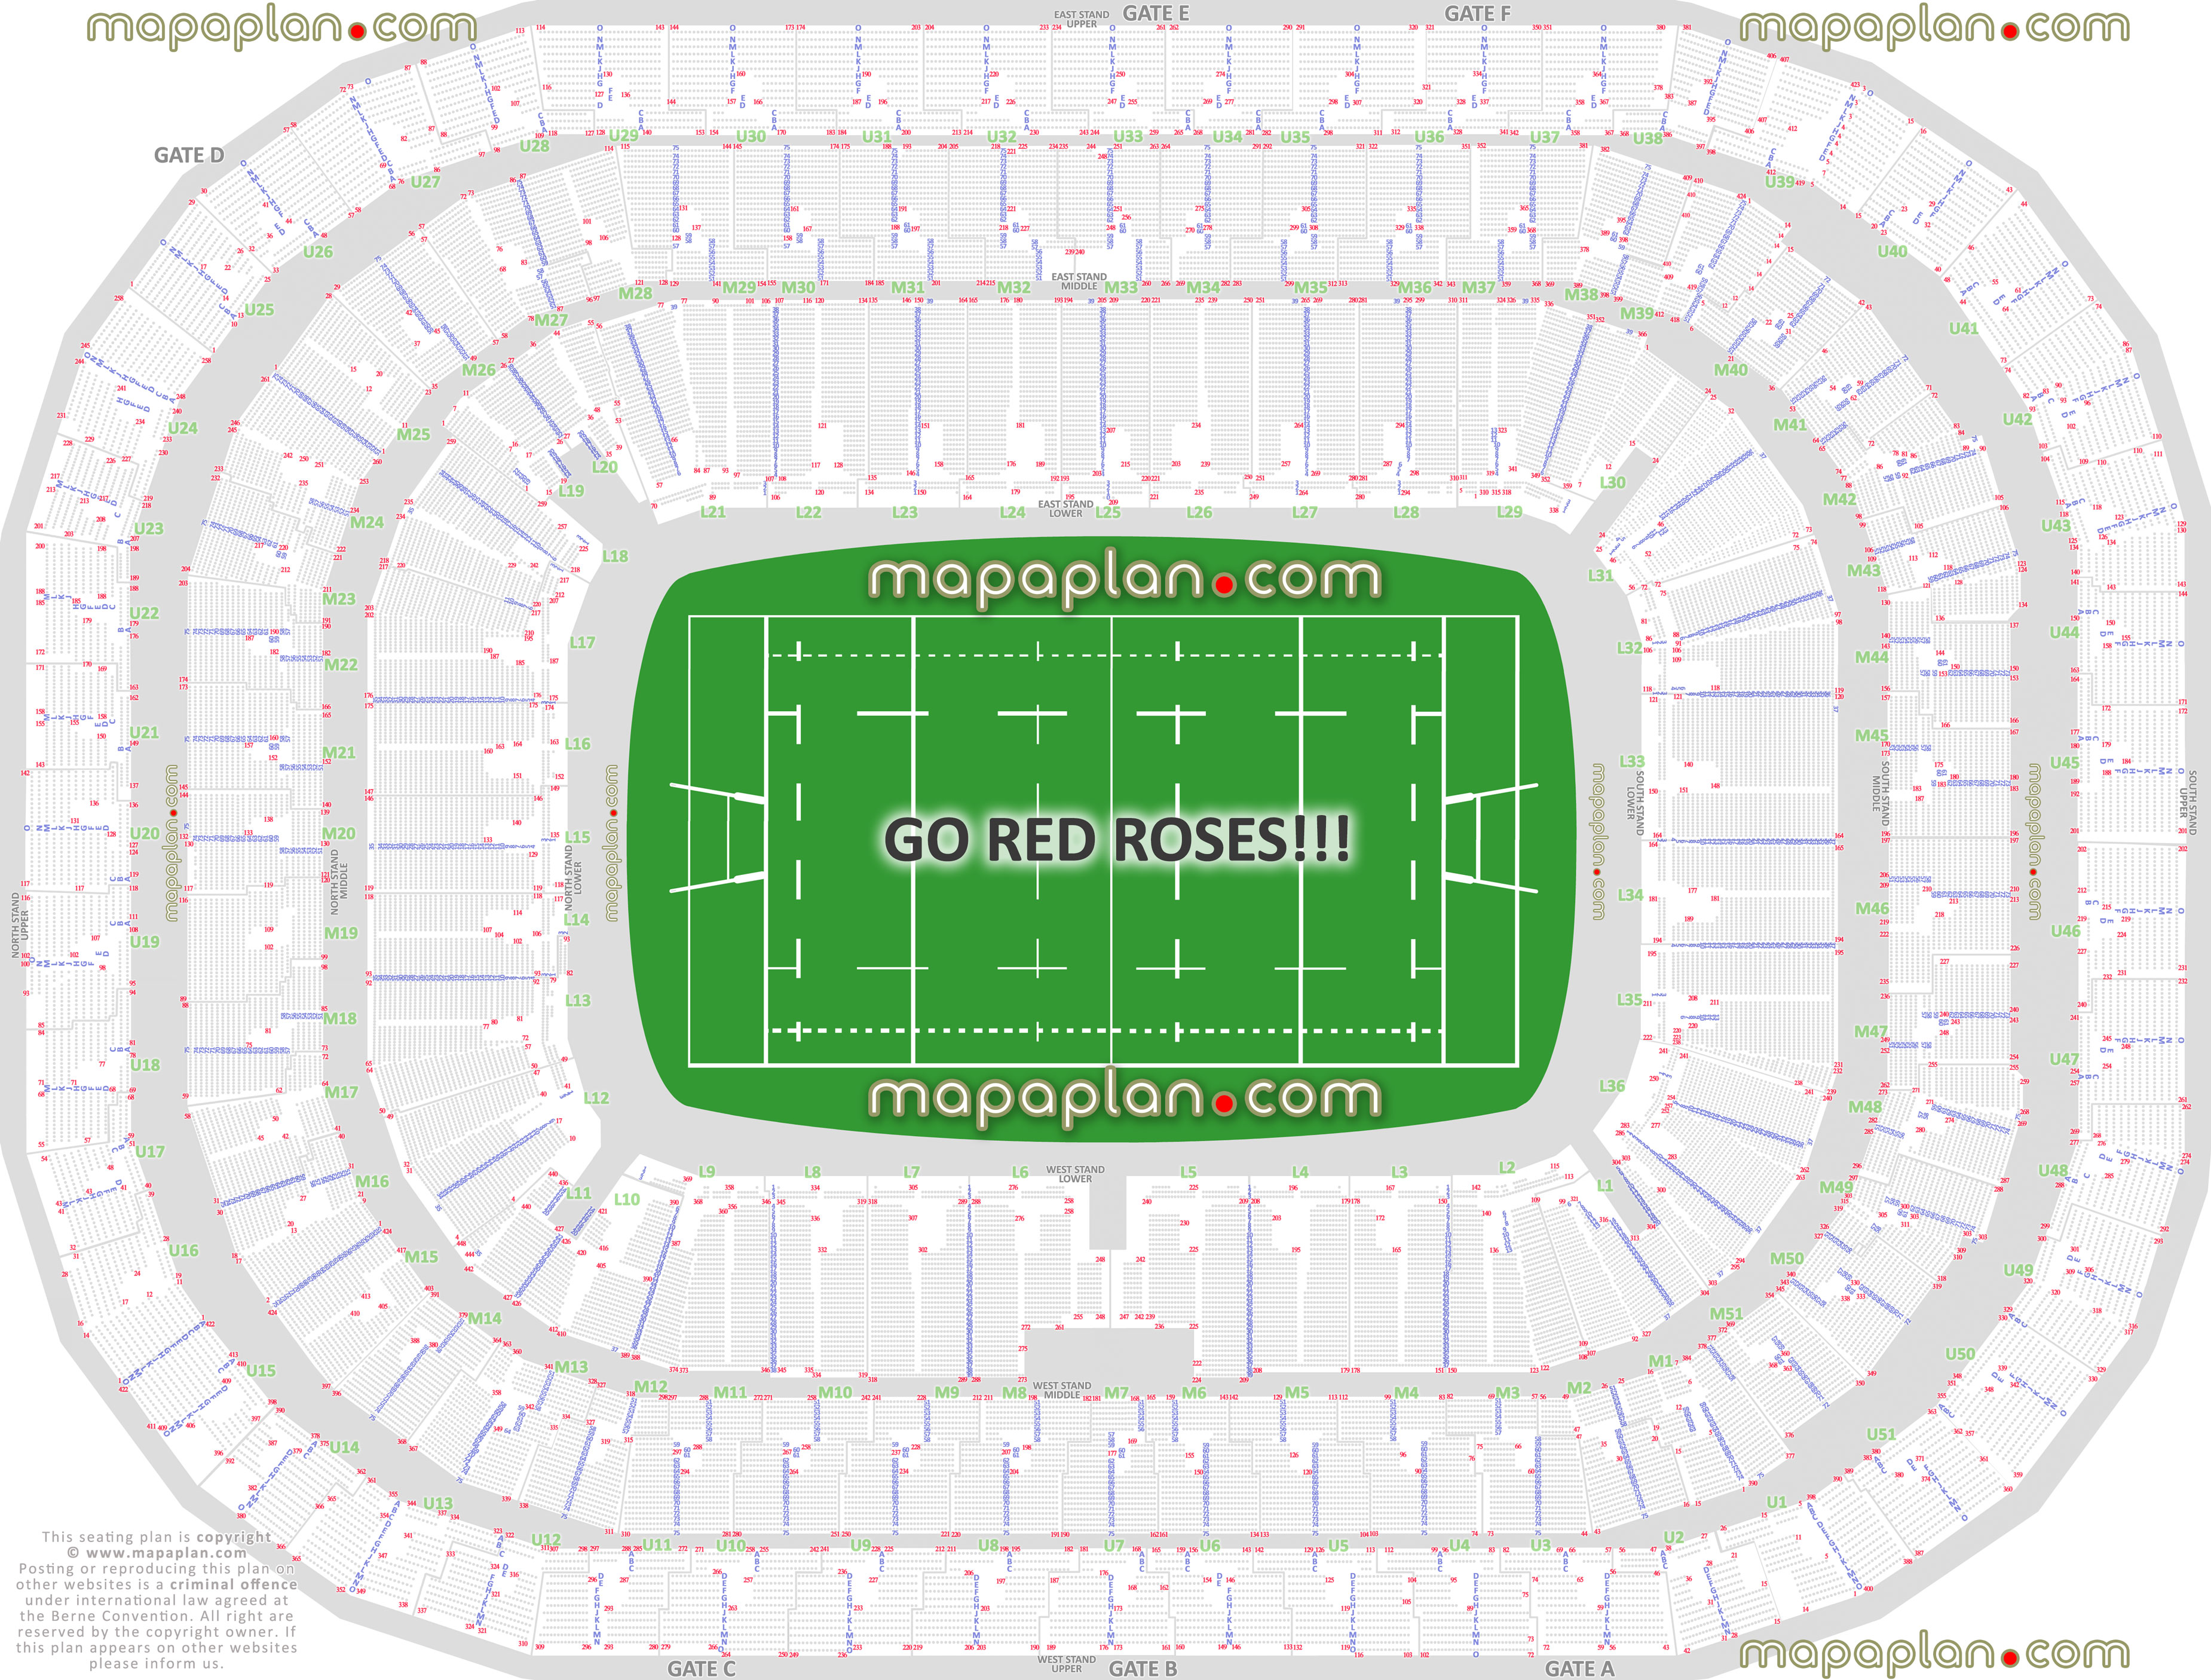 detailed seat row numbers rugby world cup sections floor plan map west east north south stands lower middle upper tier layout London Twickenham Stadium seating plan